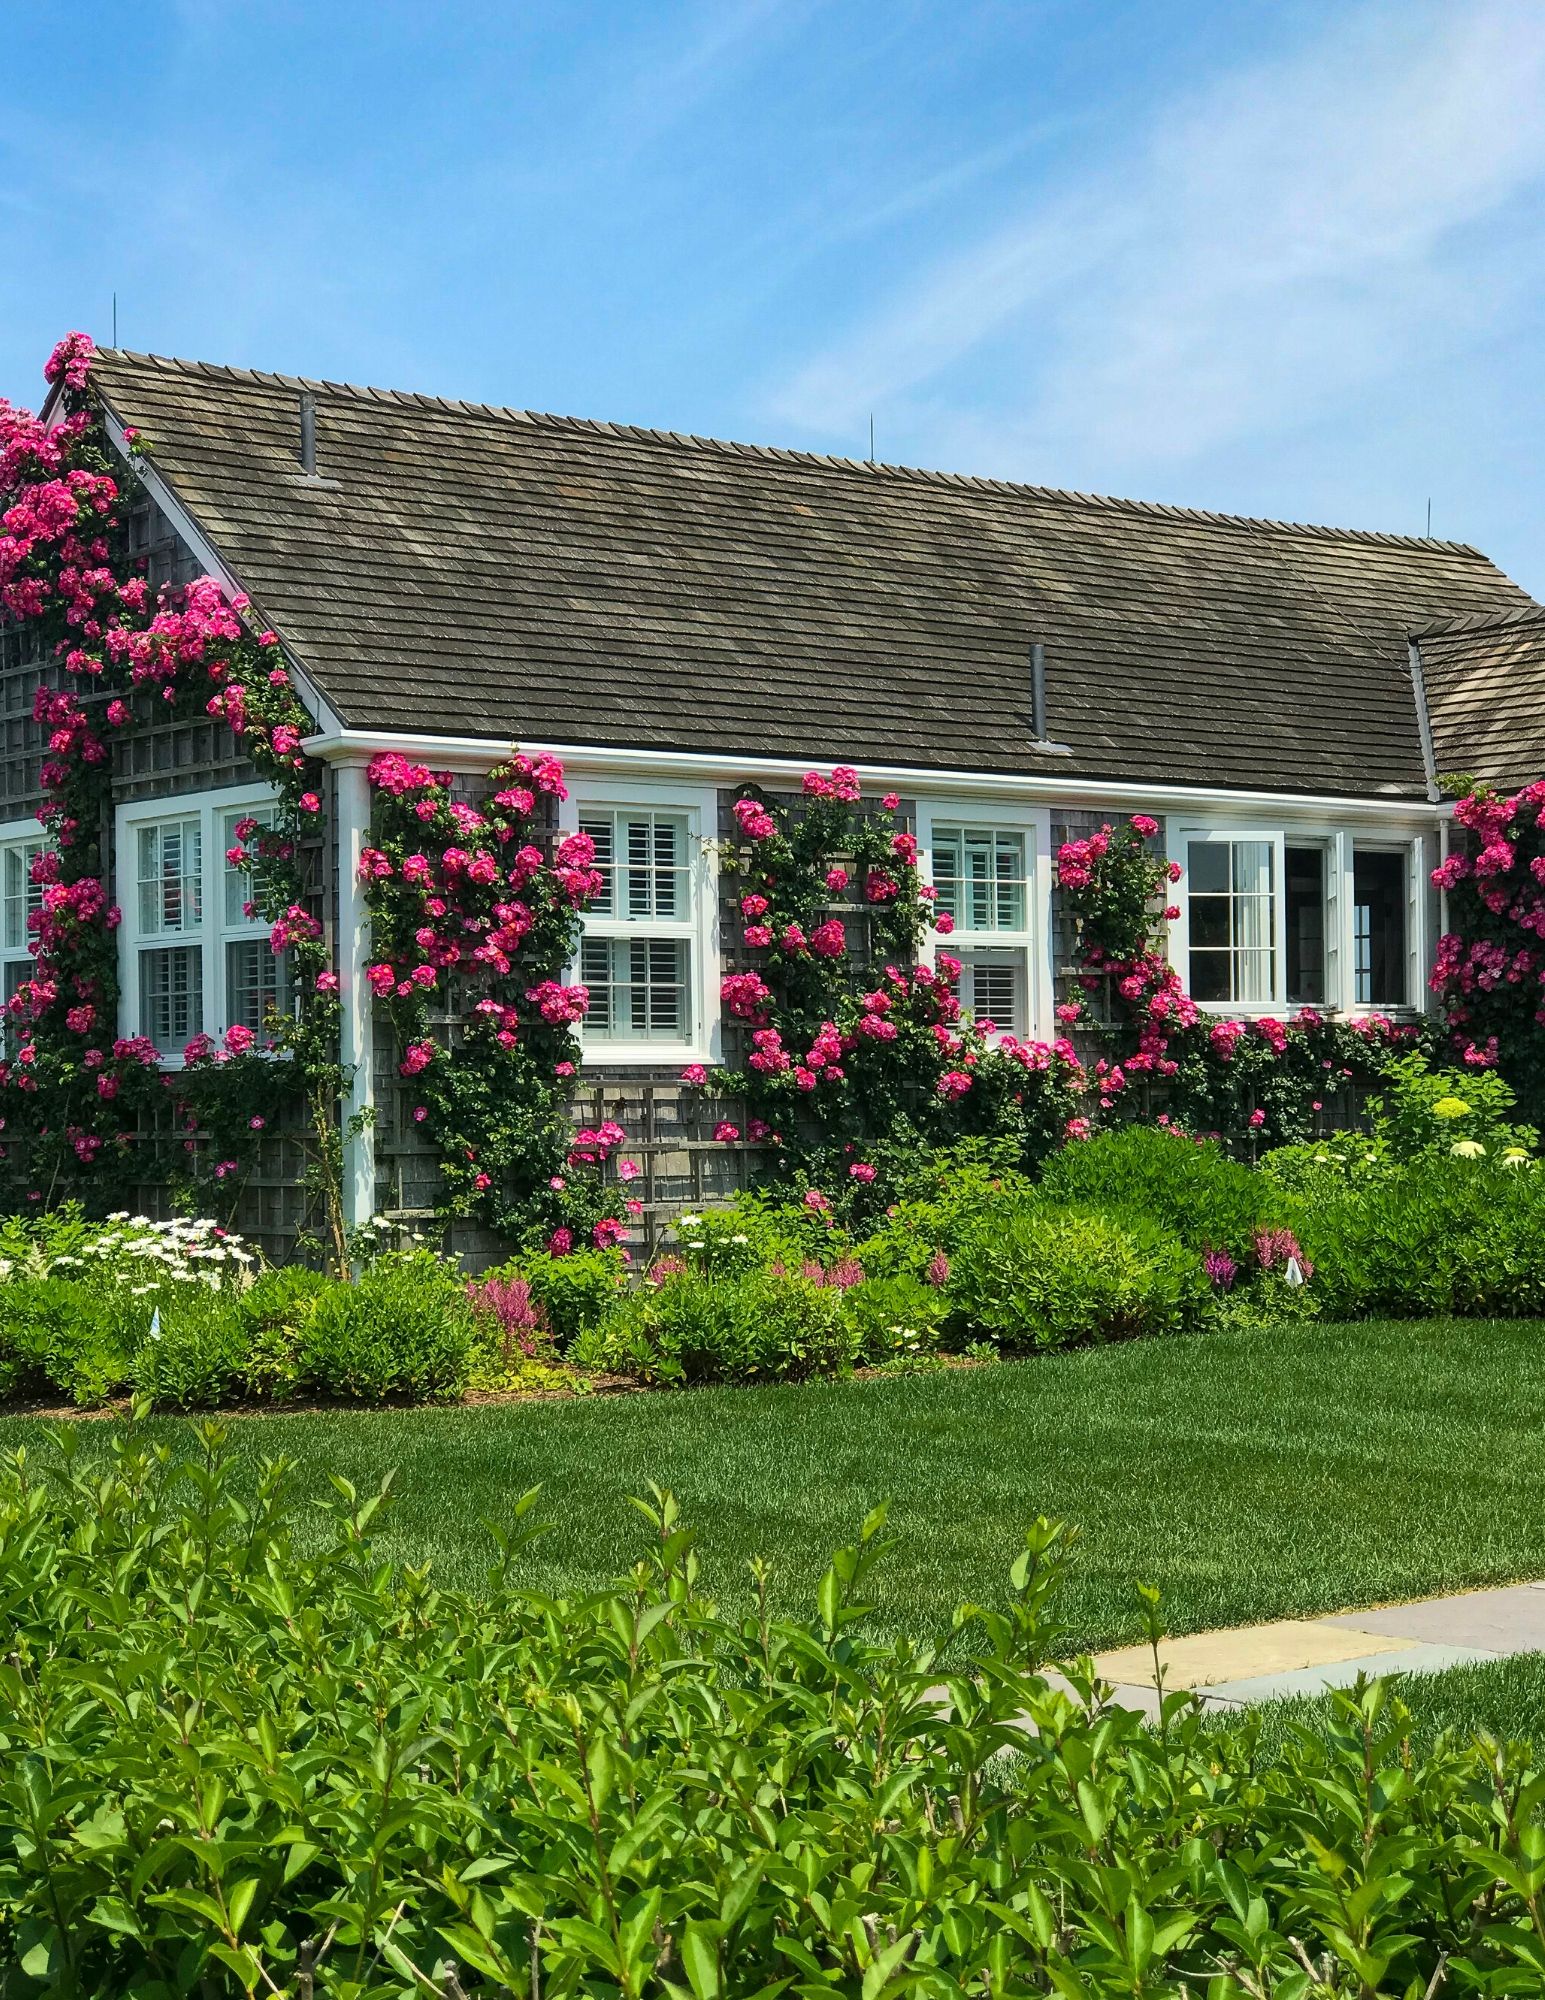 Nantucket Rose Covered Cottages in Sconset-8